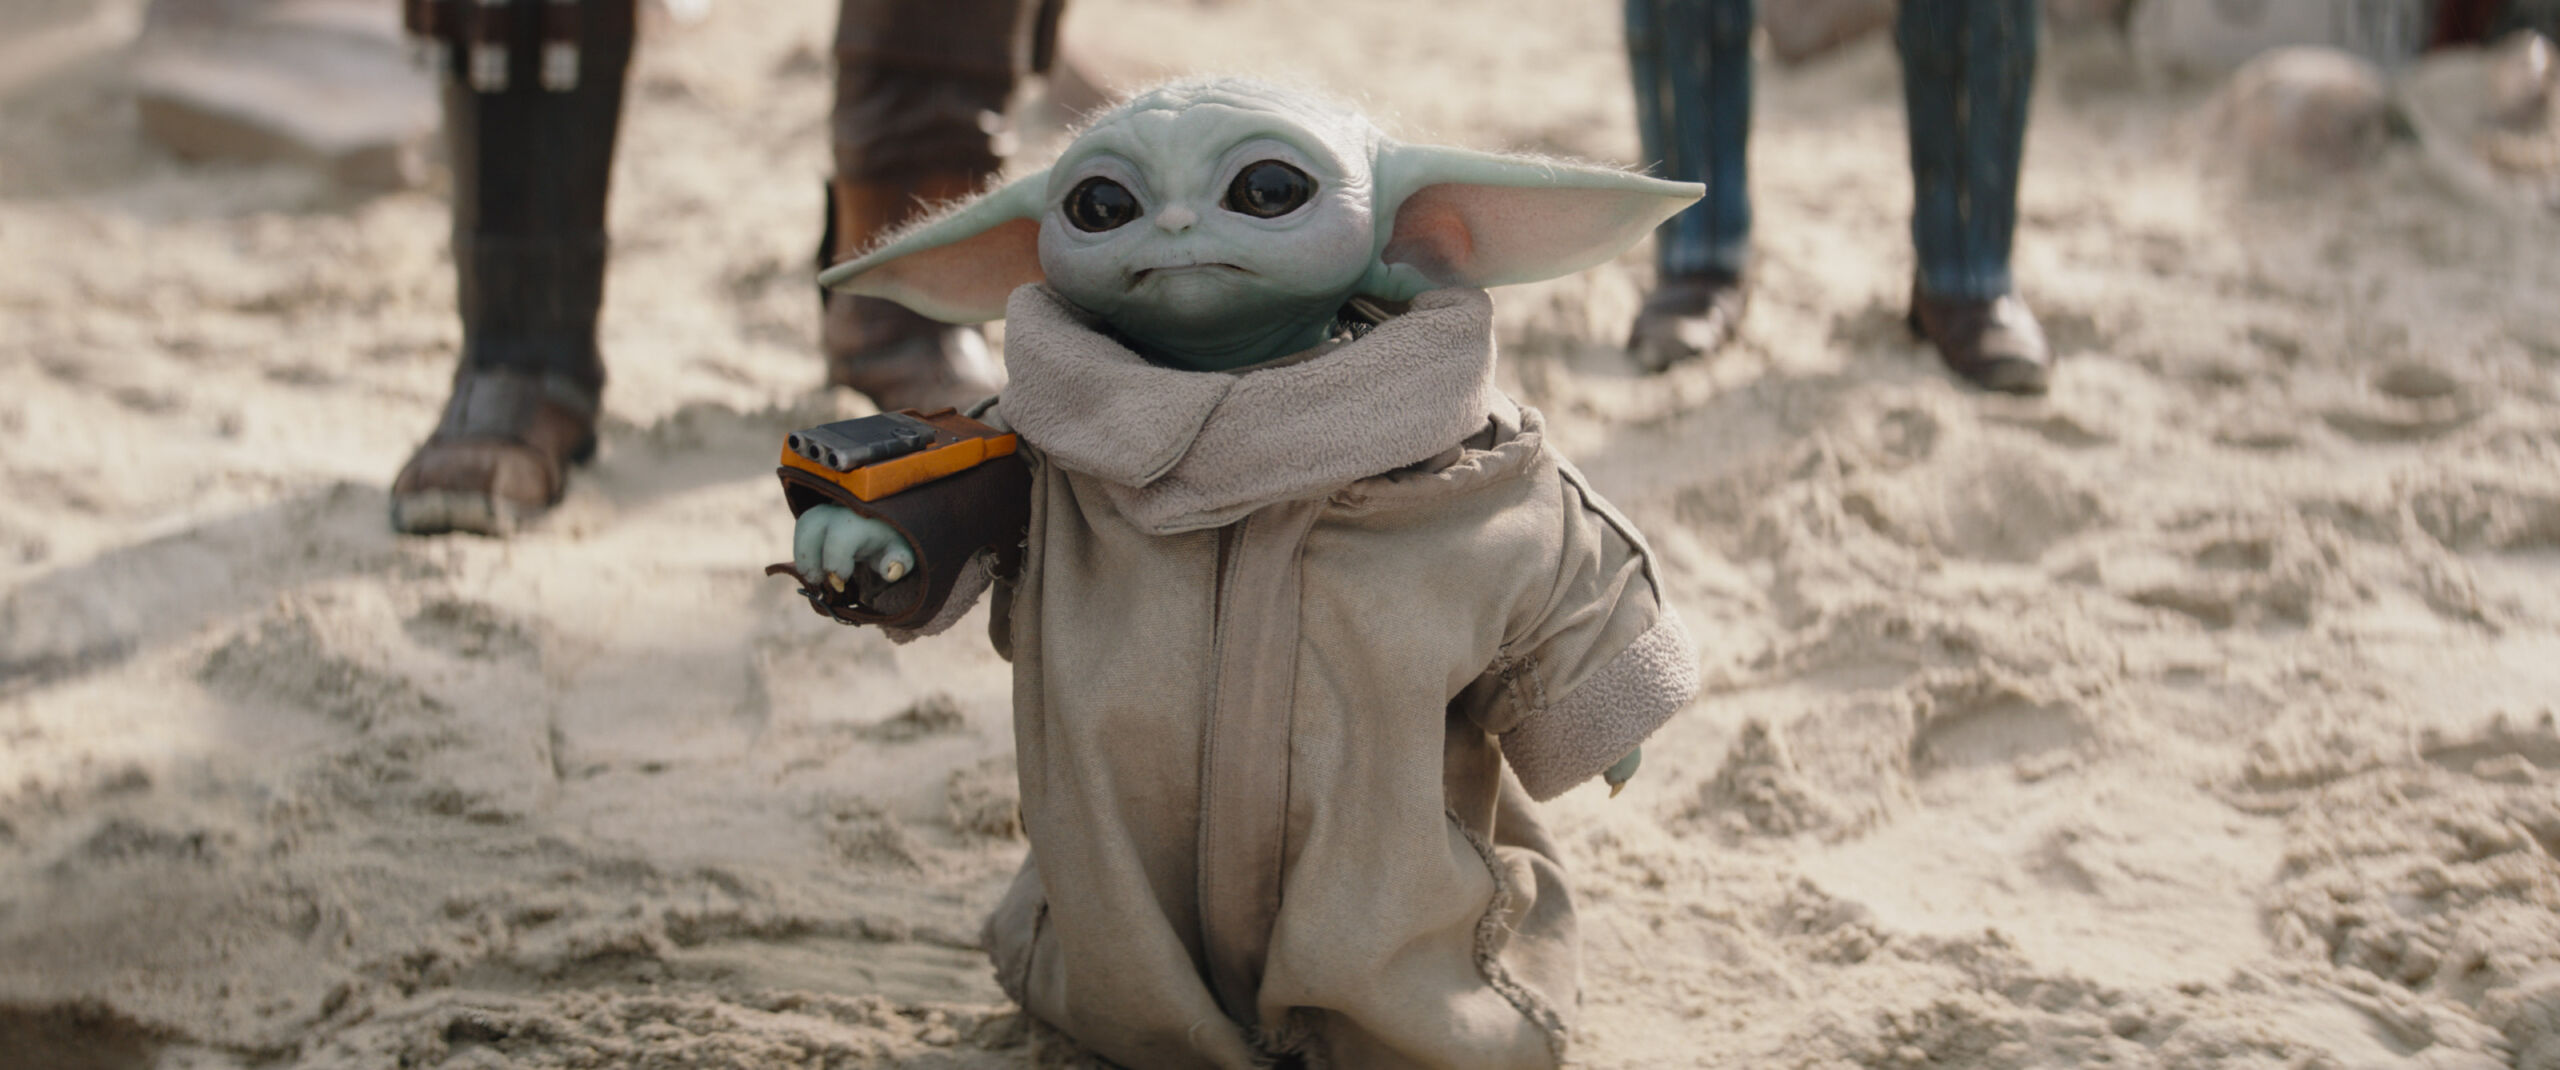 Top 45 Baby Yoda iPhone Wallpapers  iPhone Wallpapers